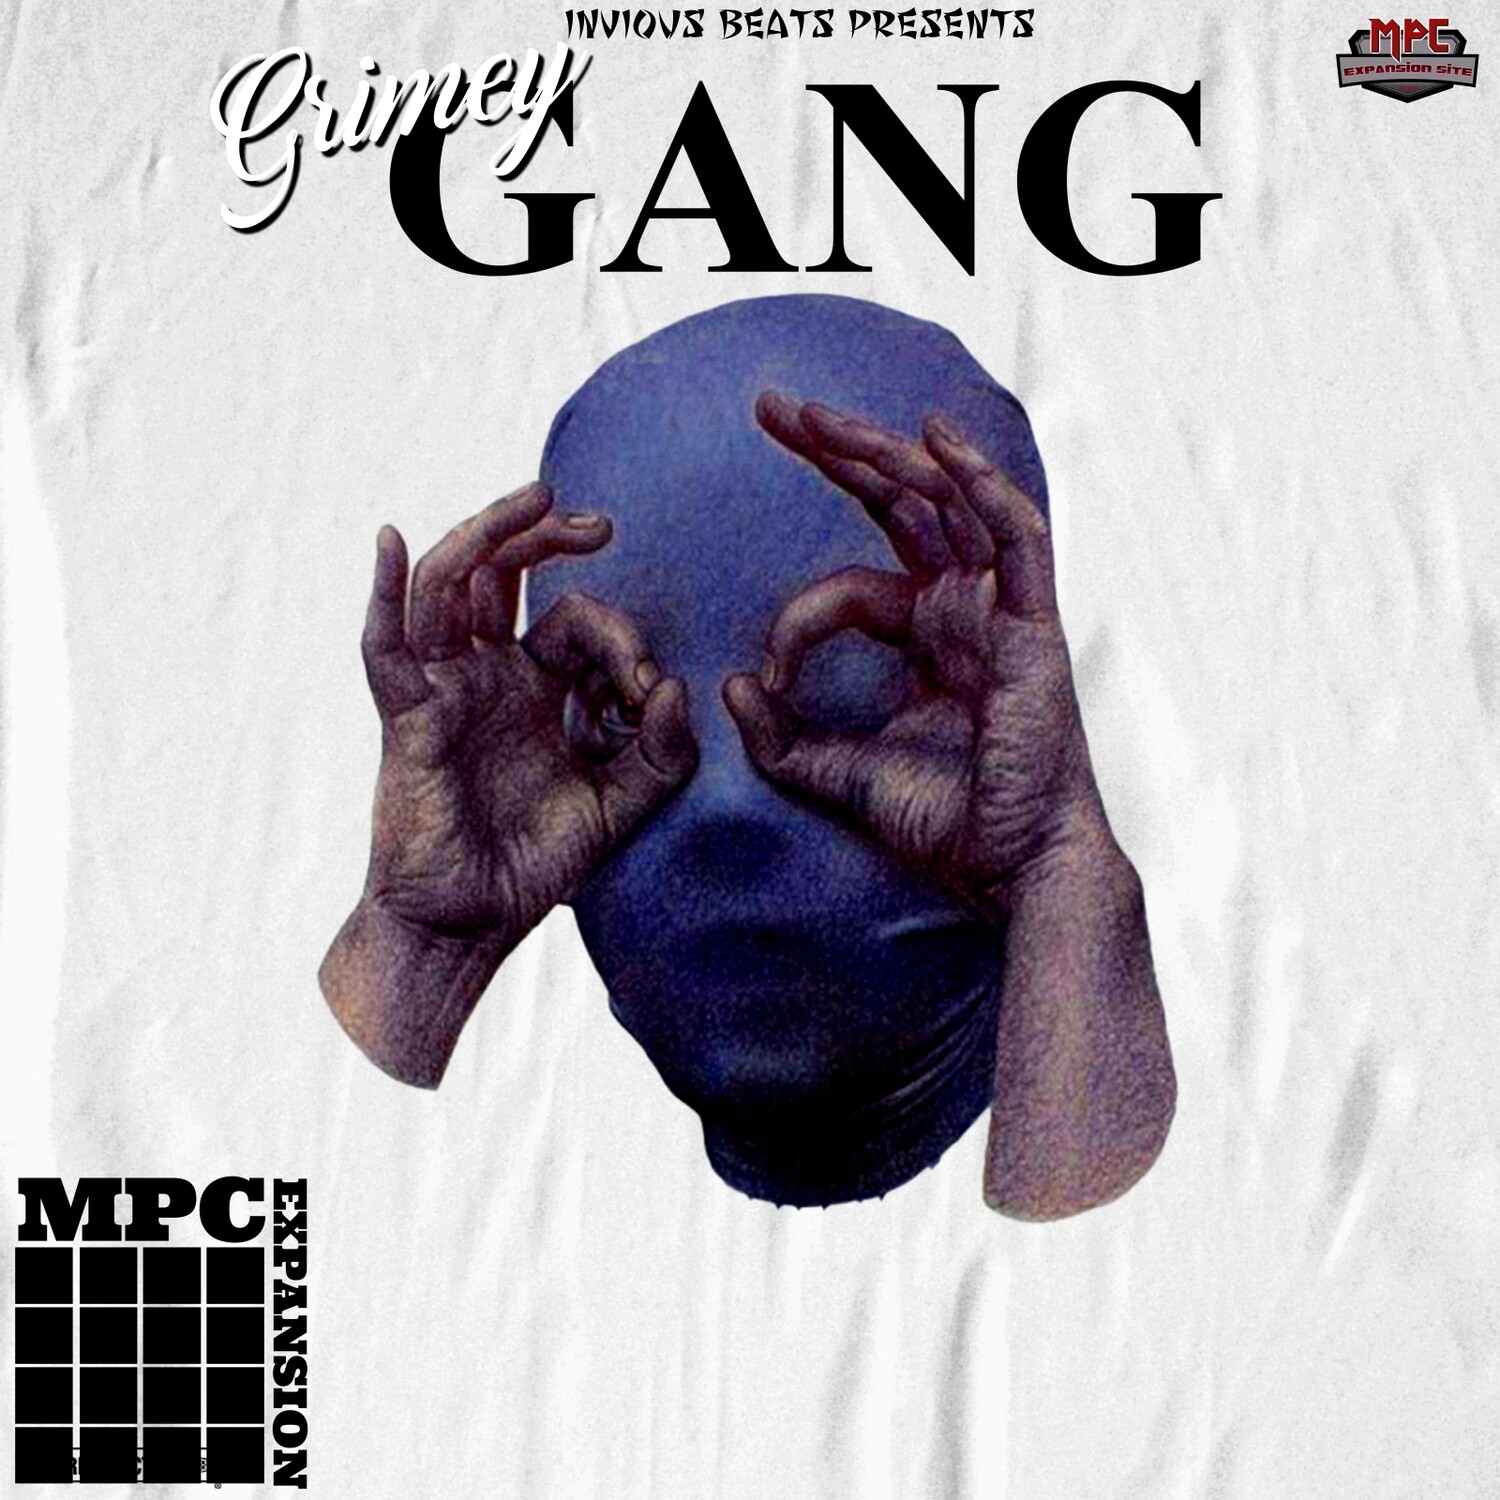 MPC EXPANSION 'GRIMEY GANG' by INVIOUS